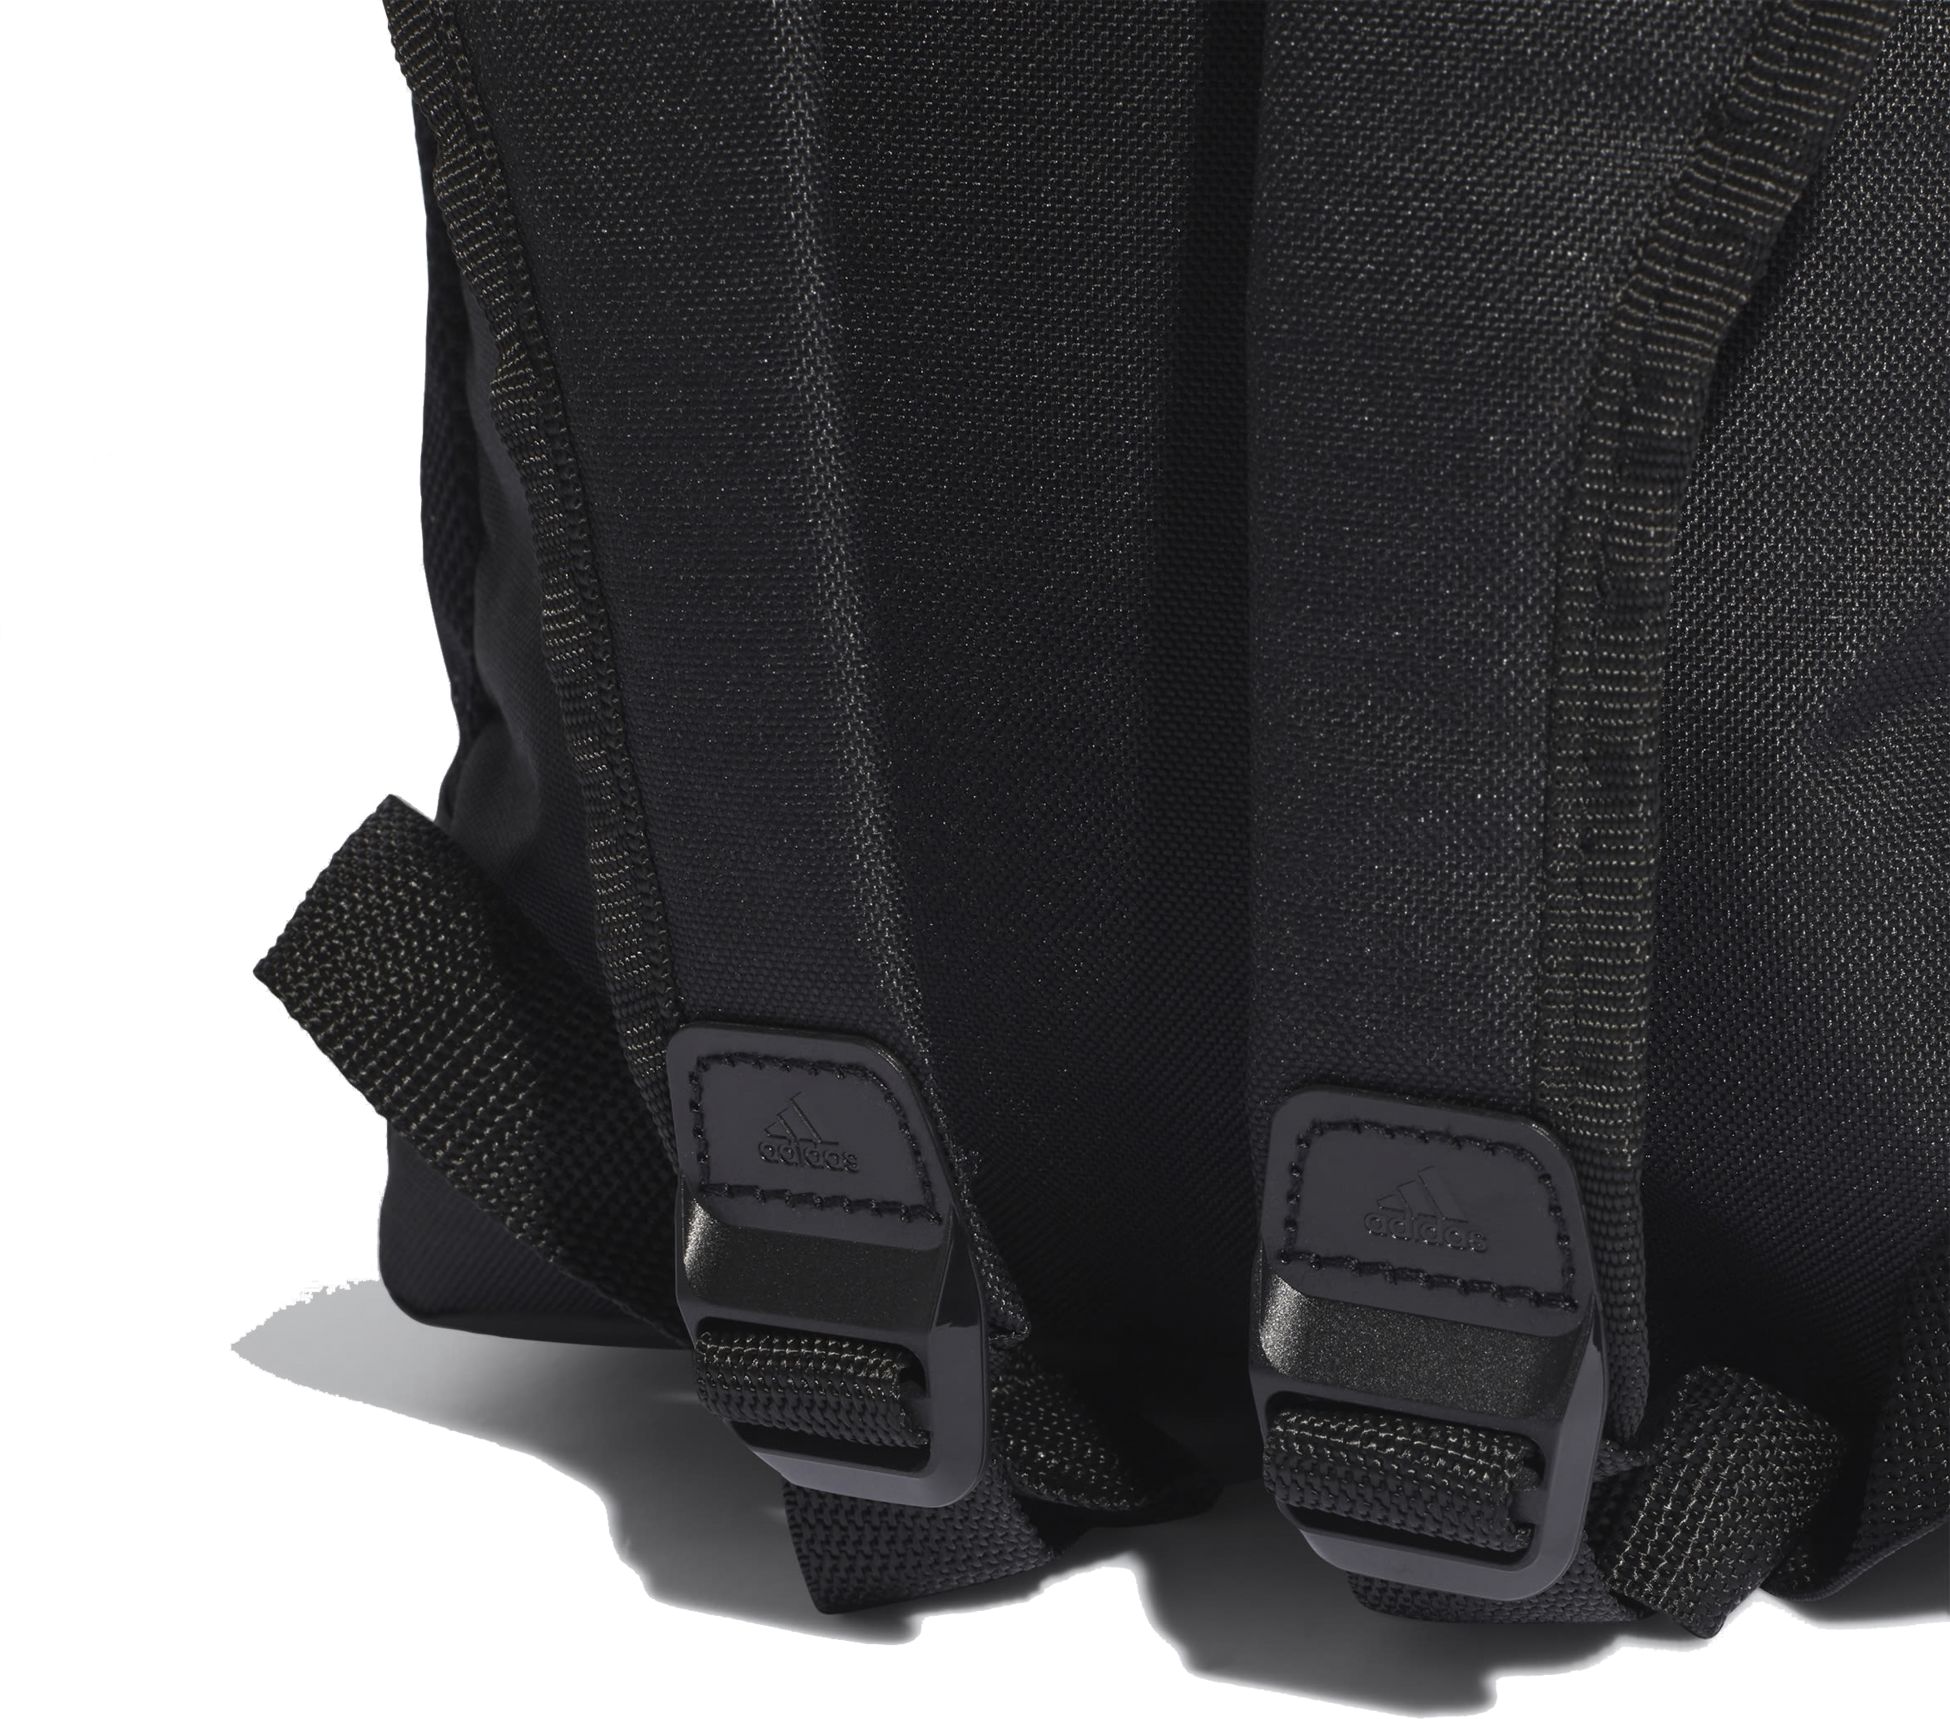 ADIDAS, Essentials Linear Backpack